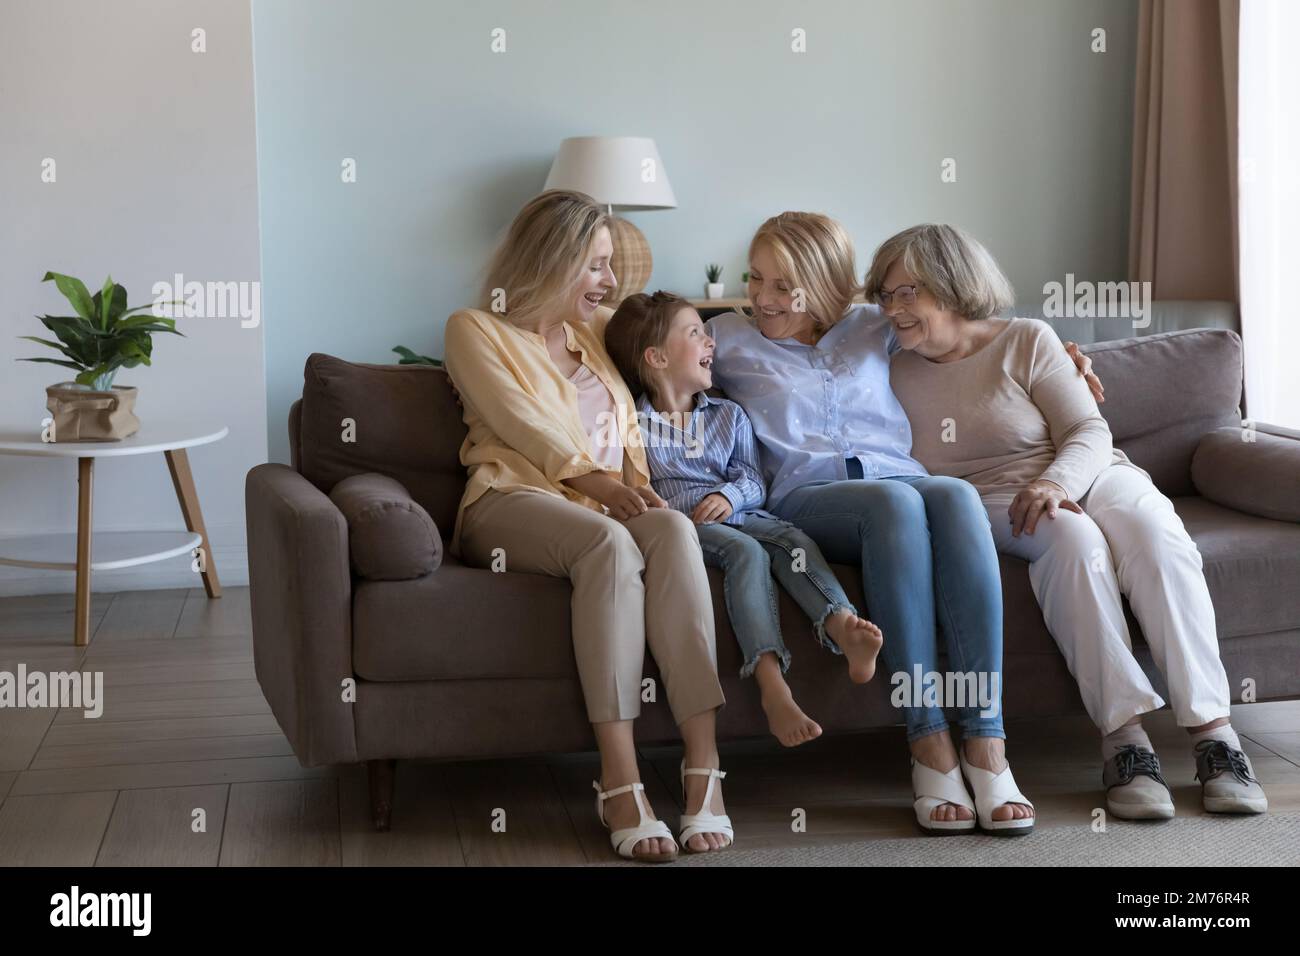 Family portrait of happy girls and women of four generations Stock Photo